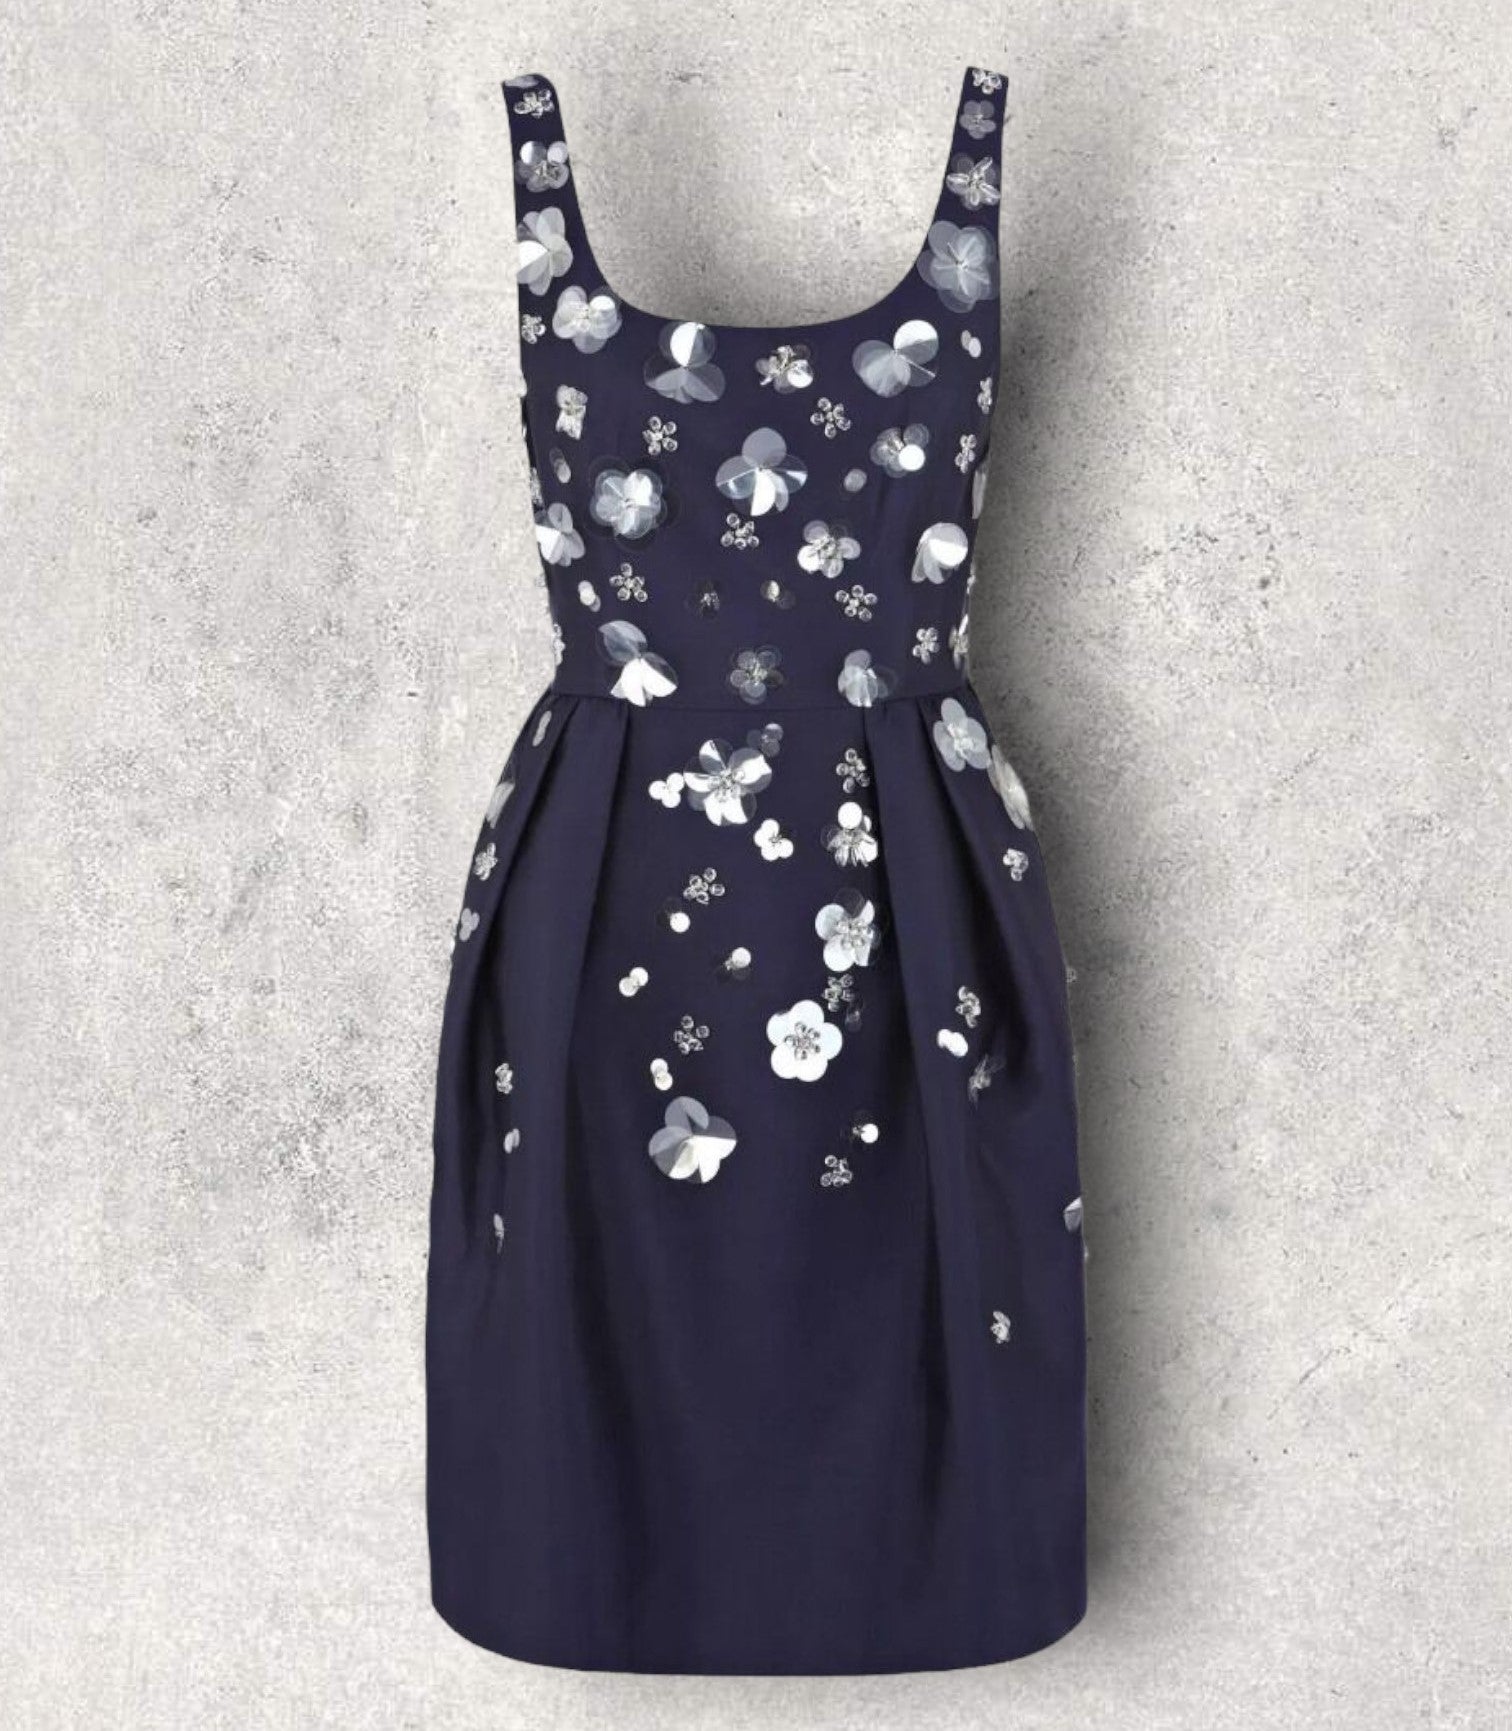 Coast Couture Womens Navy Beaded Floral Silk Mix Dress UK 10 US 6 EU 38 RRP £295 Timeless Fashions